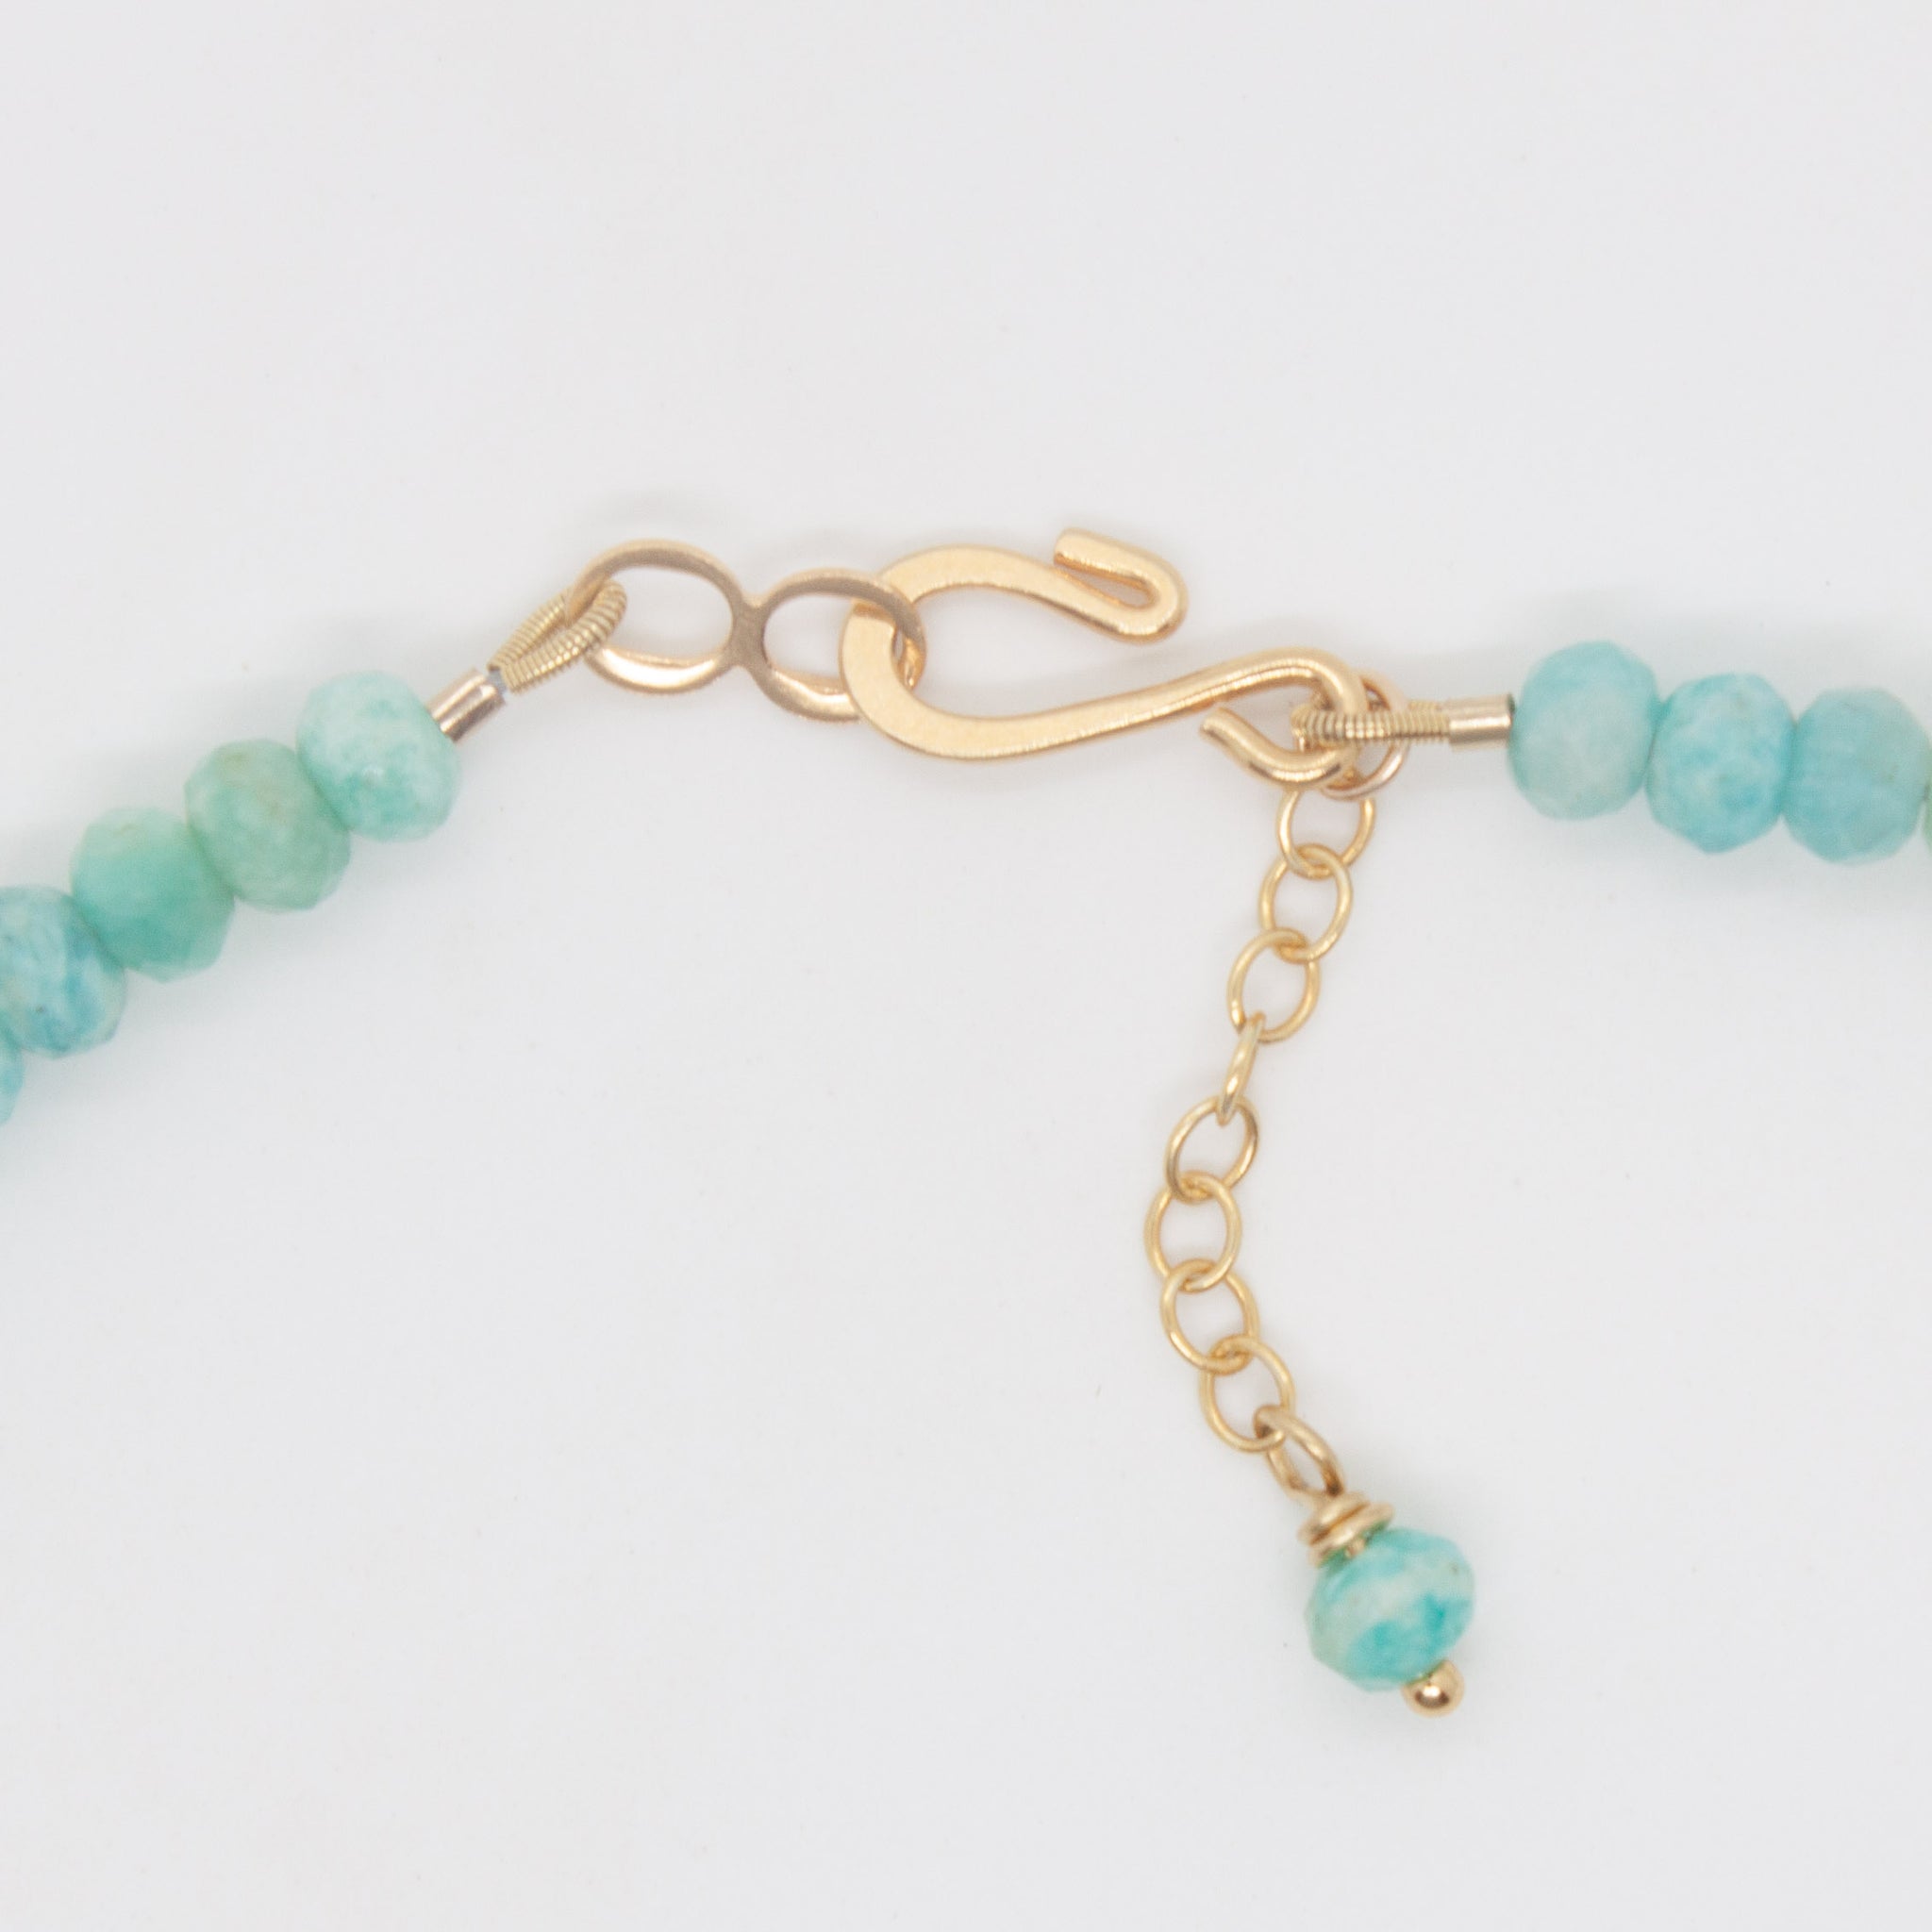 Meet our beautifully long and versatile amazonite & gold necklace that can be worn 4 different ways! 30 inch faceted amazonite and gold beaded necklace (and bracelet if you want to!). Handmade in Toronto by kp jewelry co.